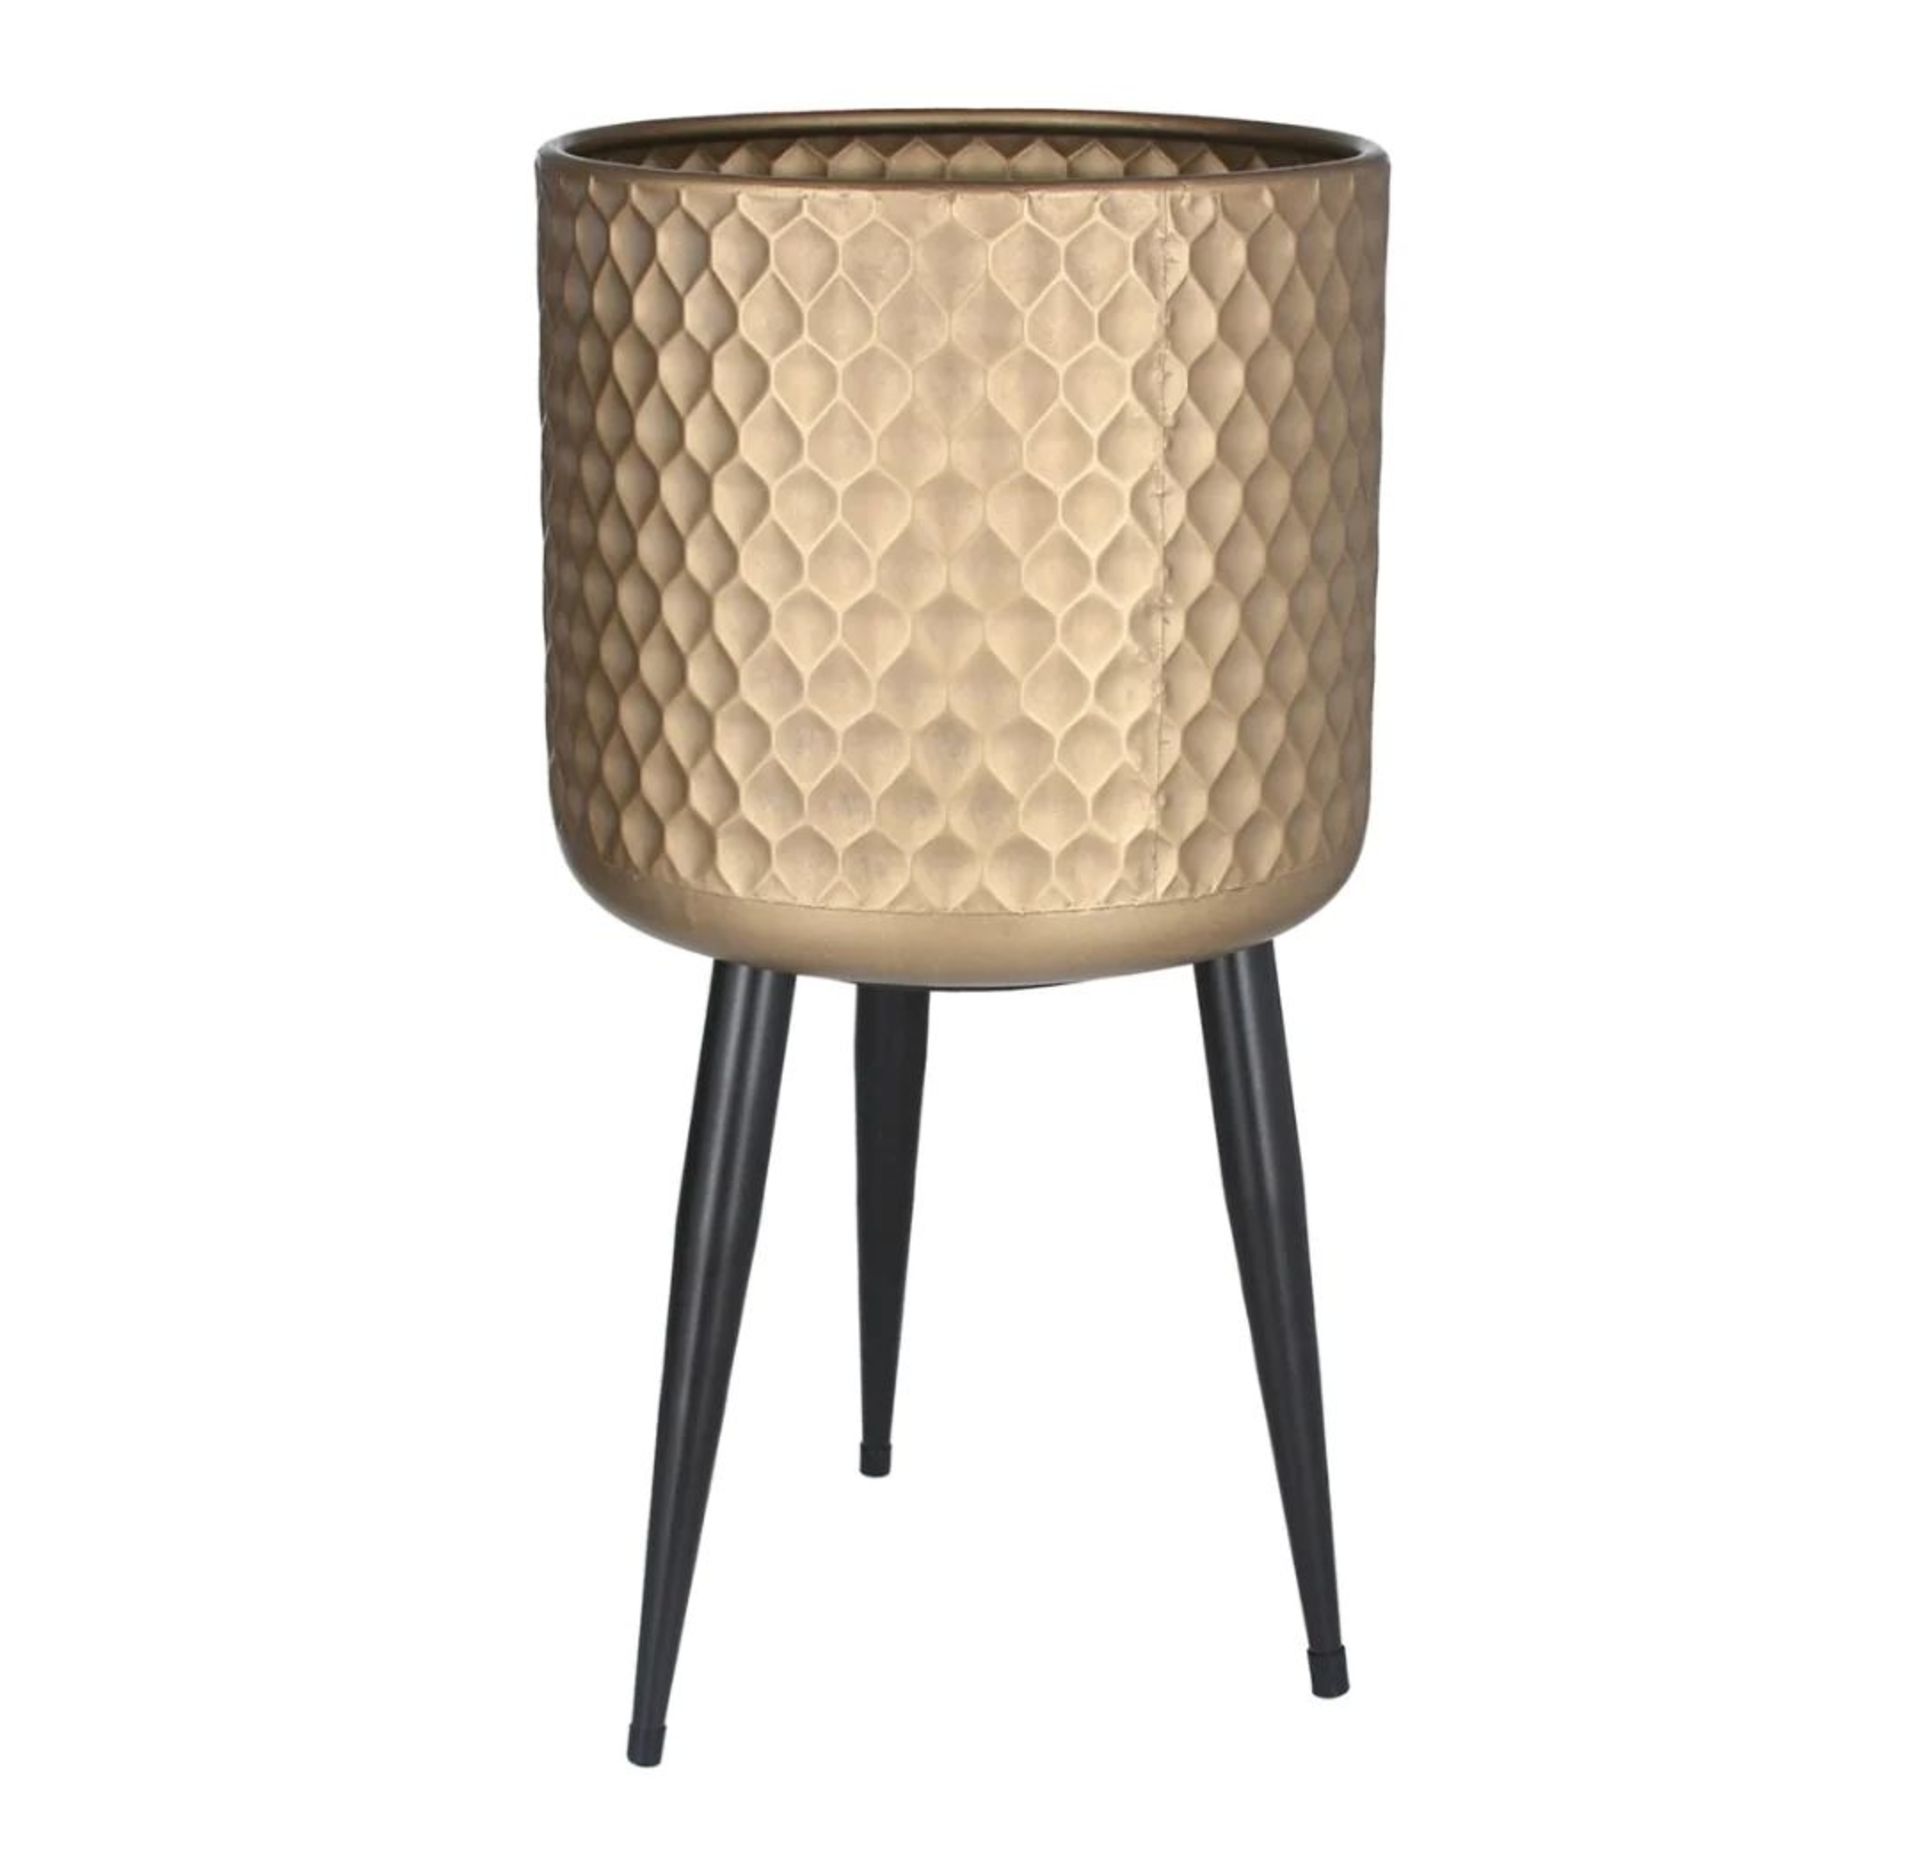 PALLET TO INCLUDE 160 X BRAND NEW GISELA GRAHAM GOLD DIMPLE METAL POT COVERS WITH LEGS SMALL 20CM